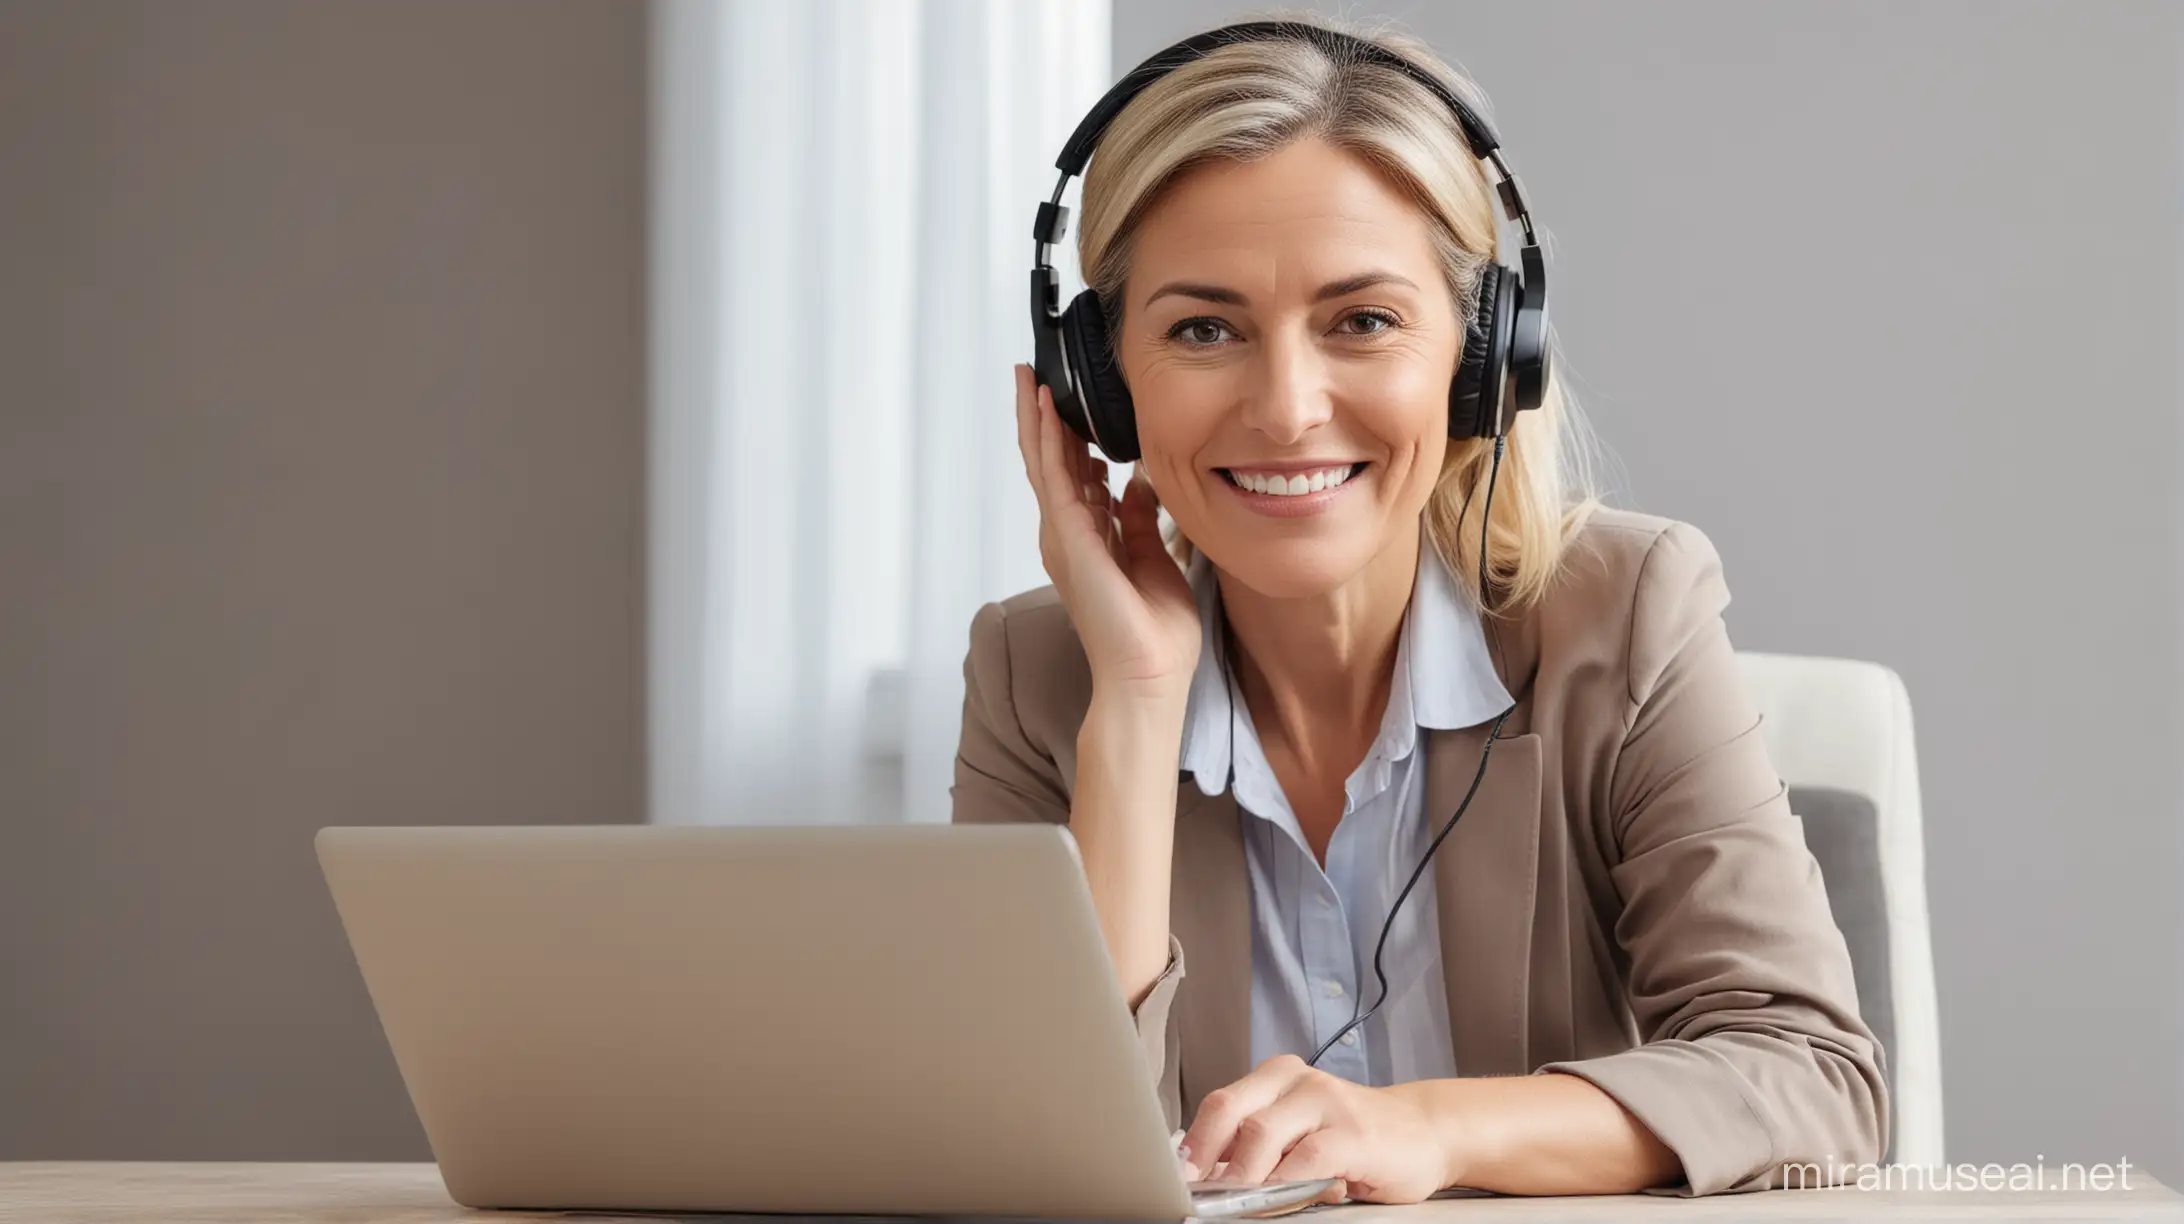 middleaged businesswoman listening very interested to an onlinecourse, looking to her laptop with smile on her face and headphones


